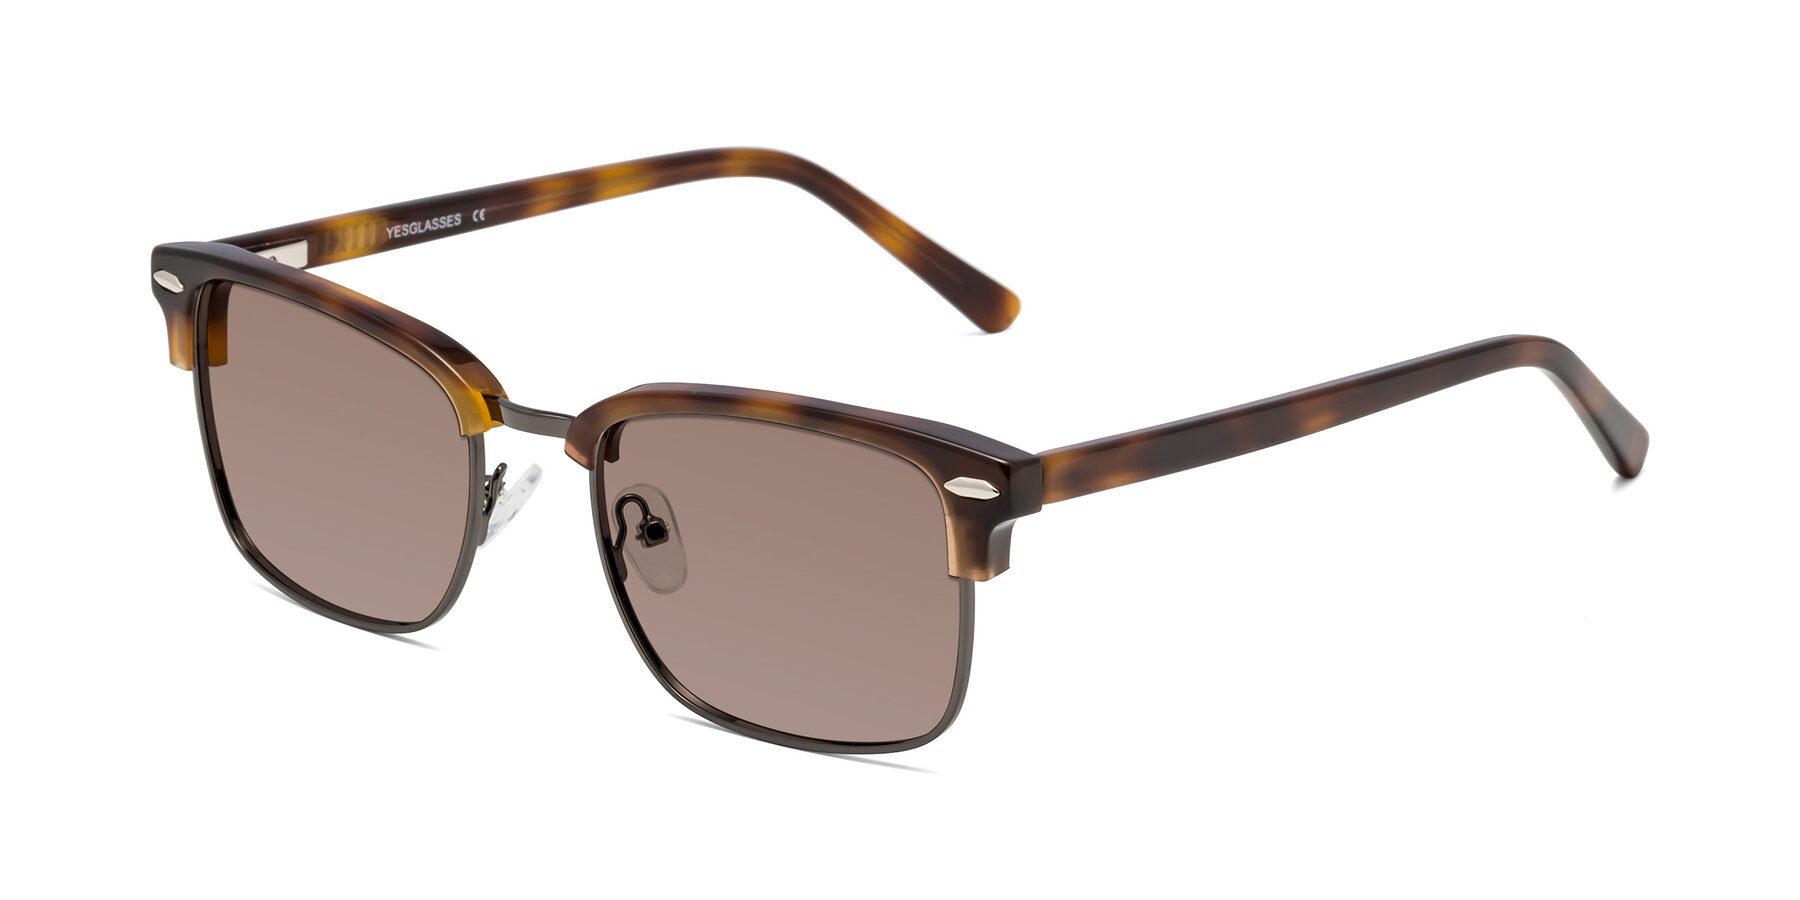 Angle of 17464 in Tortoise/ Gunmetal with Medium Brown Tinted Lenses